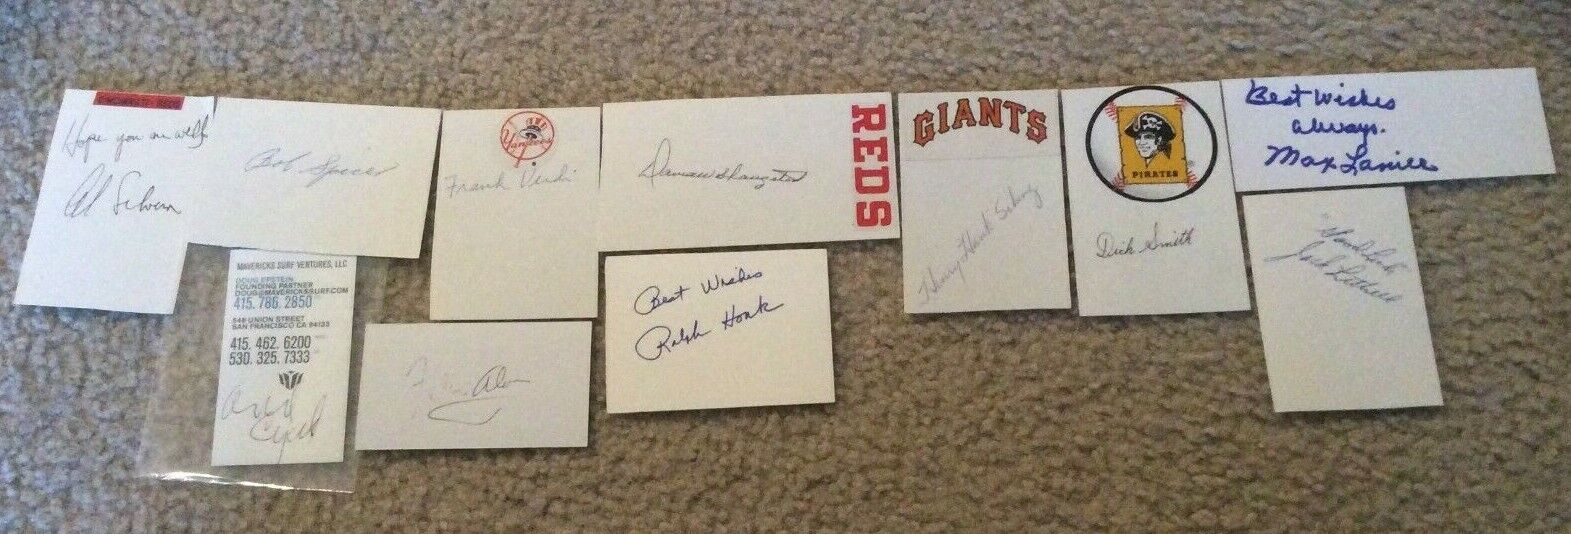 Baseball Lot of (11) Autograph Signed Vintage 2x3 Cards     